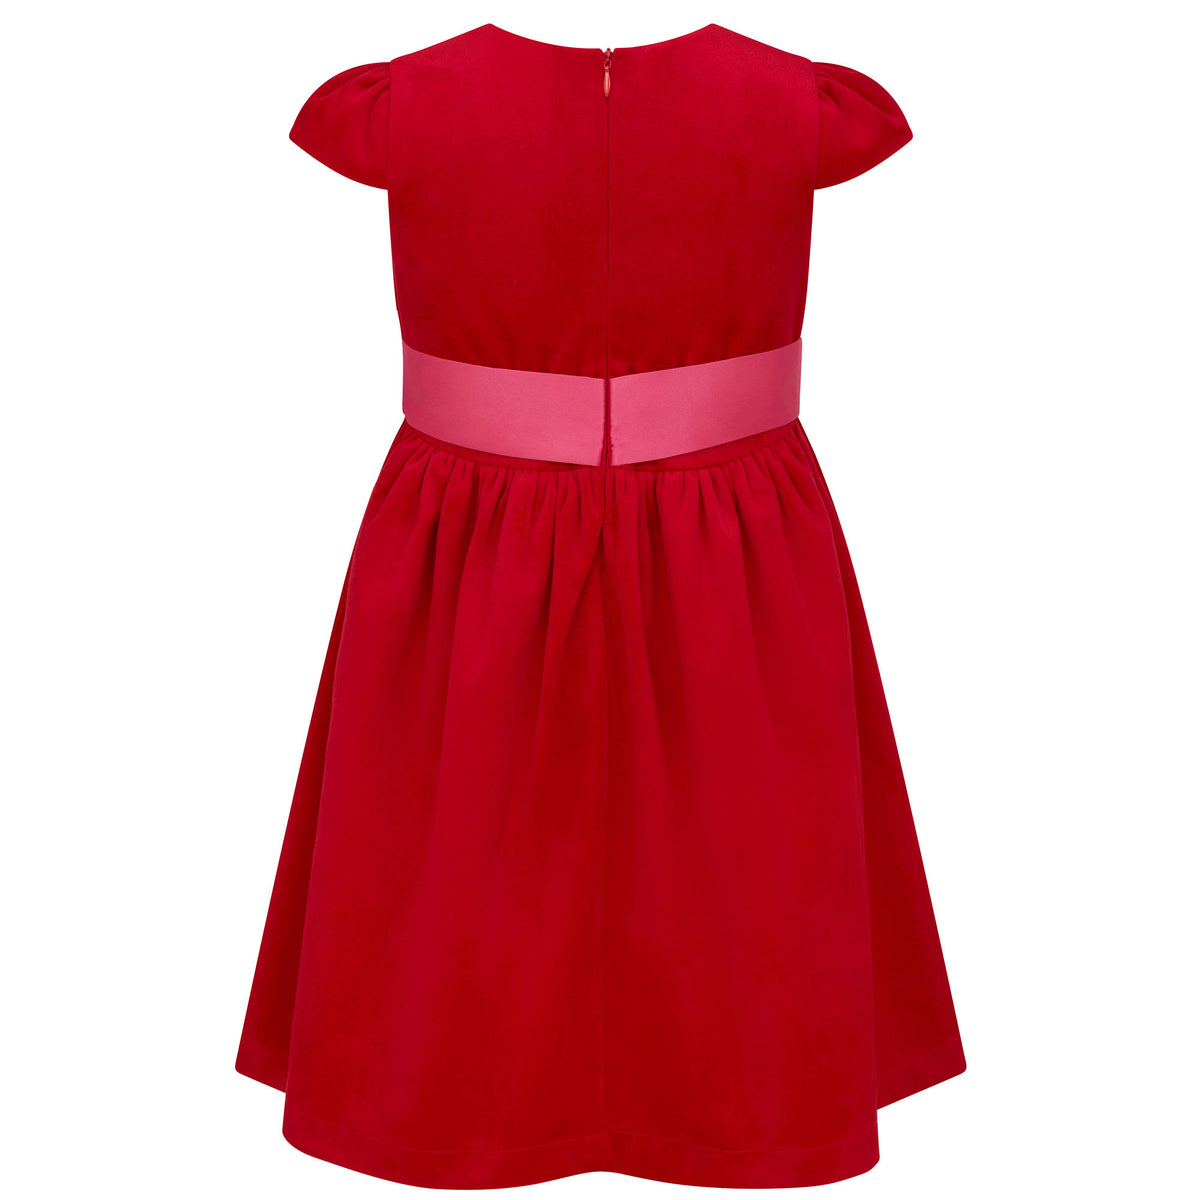 Lilibet Girls Party Dress Red & Pink | Holly Hastie London